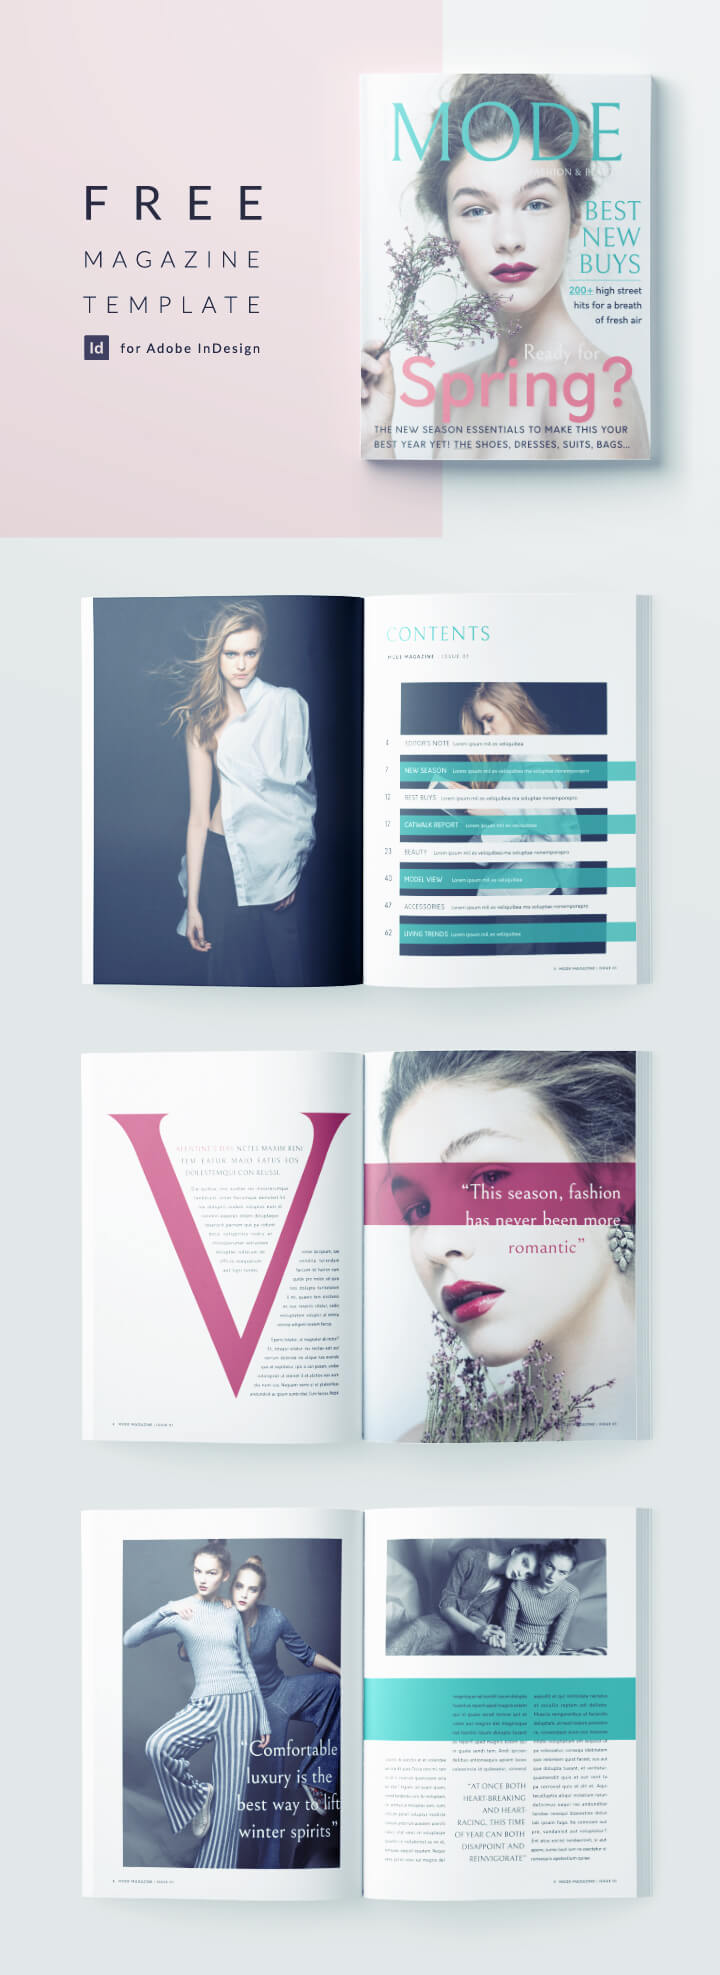 free fashion magazine template for indesign - full magazine template